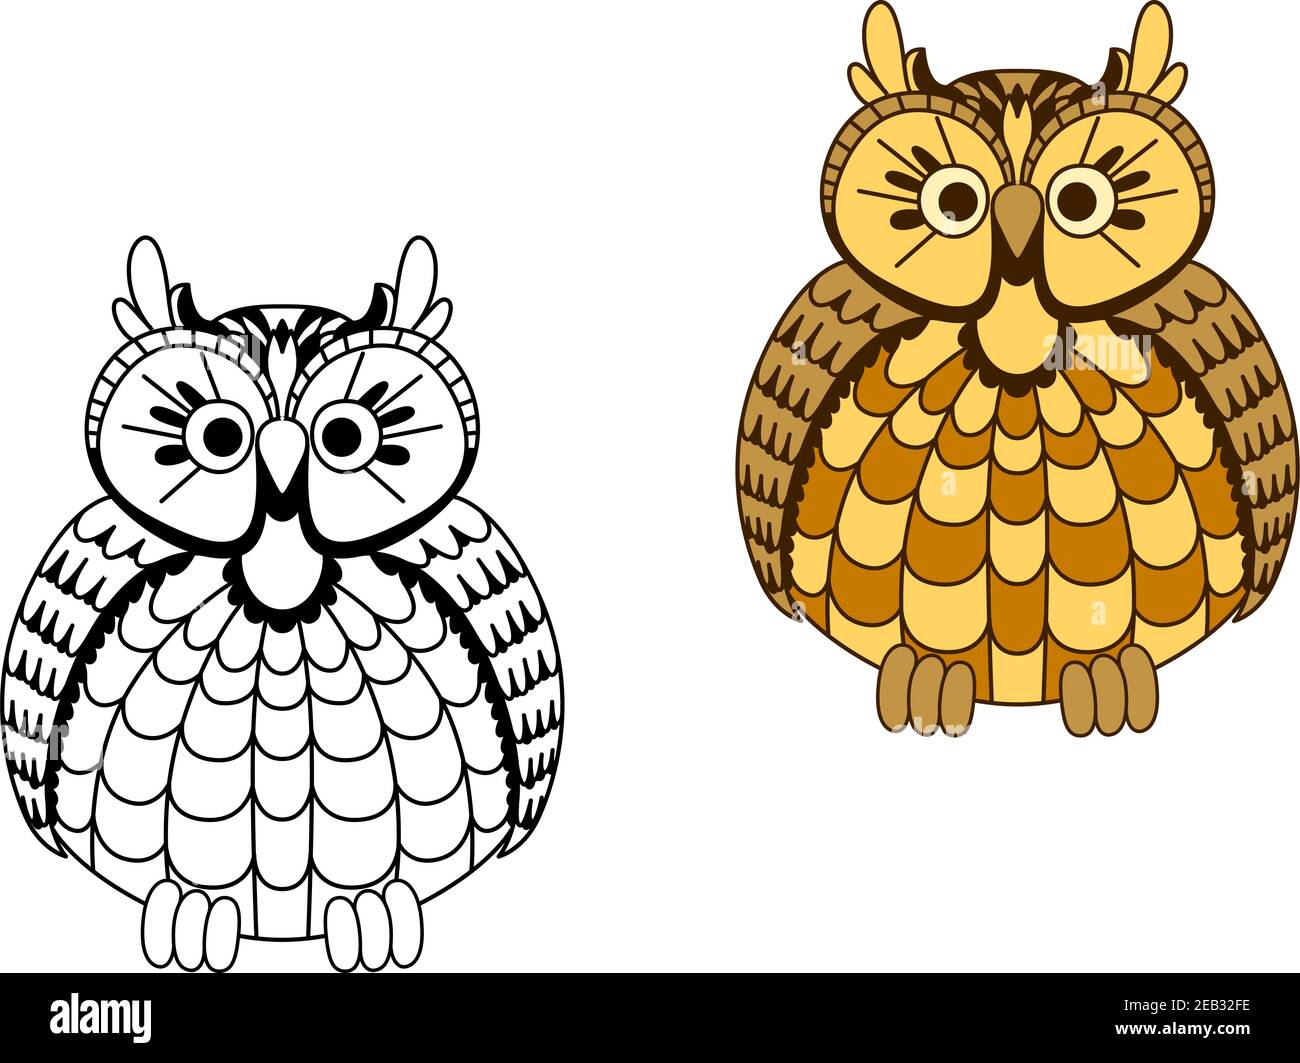 Old wise cartoon eagle owl bird with mottled yellow and orange rounded body and brown wings Stock Vector